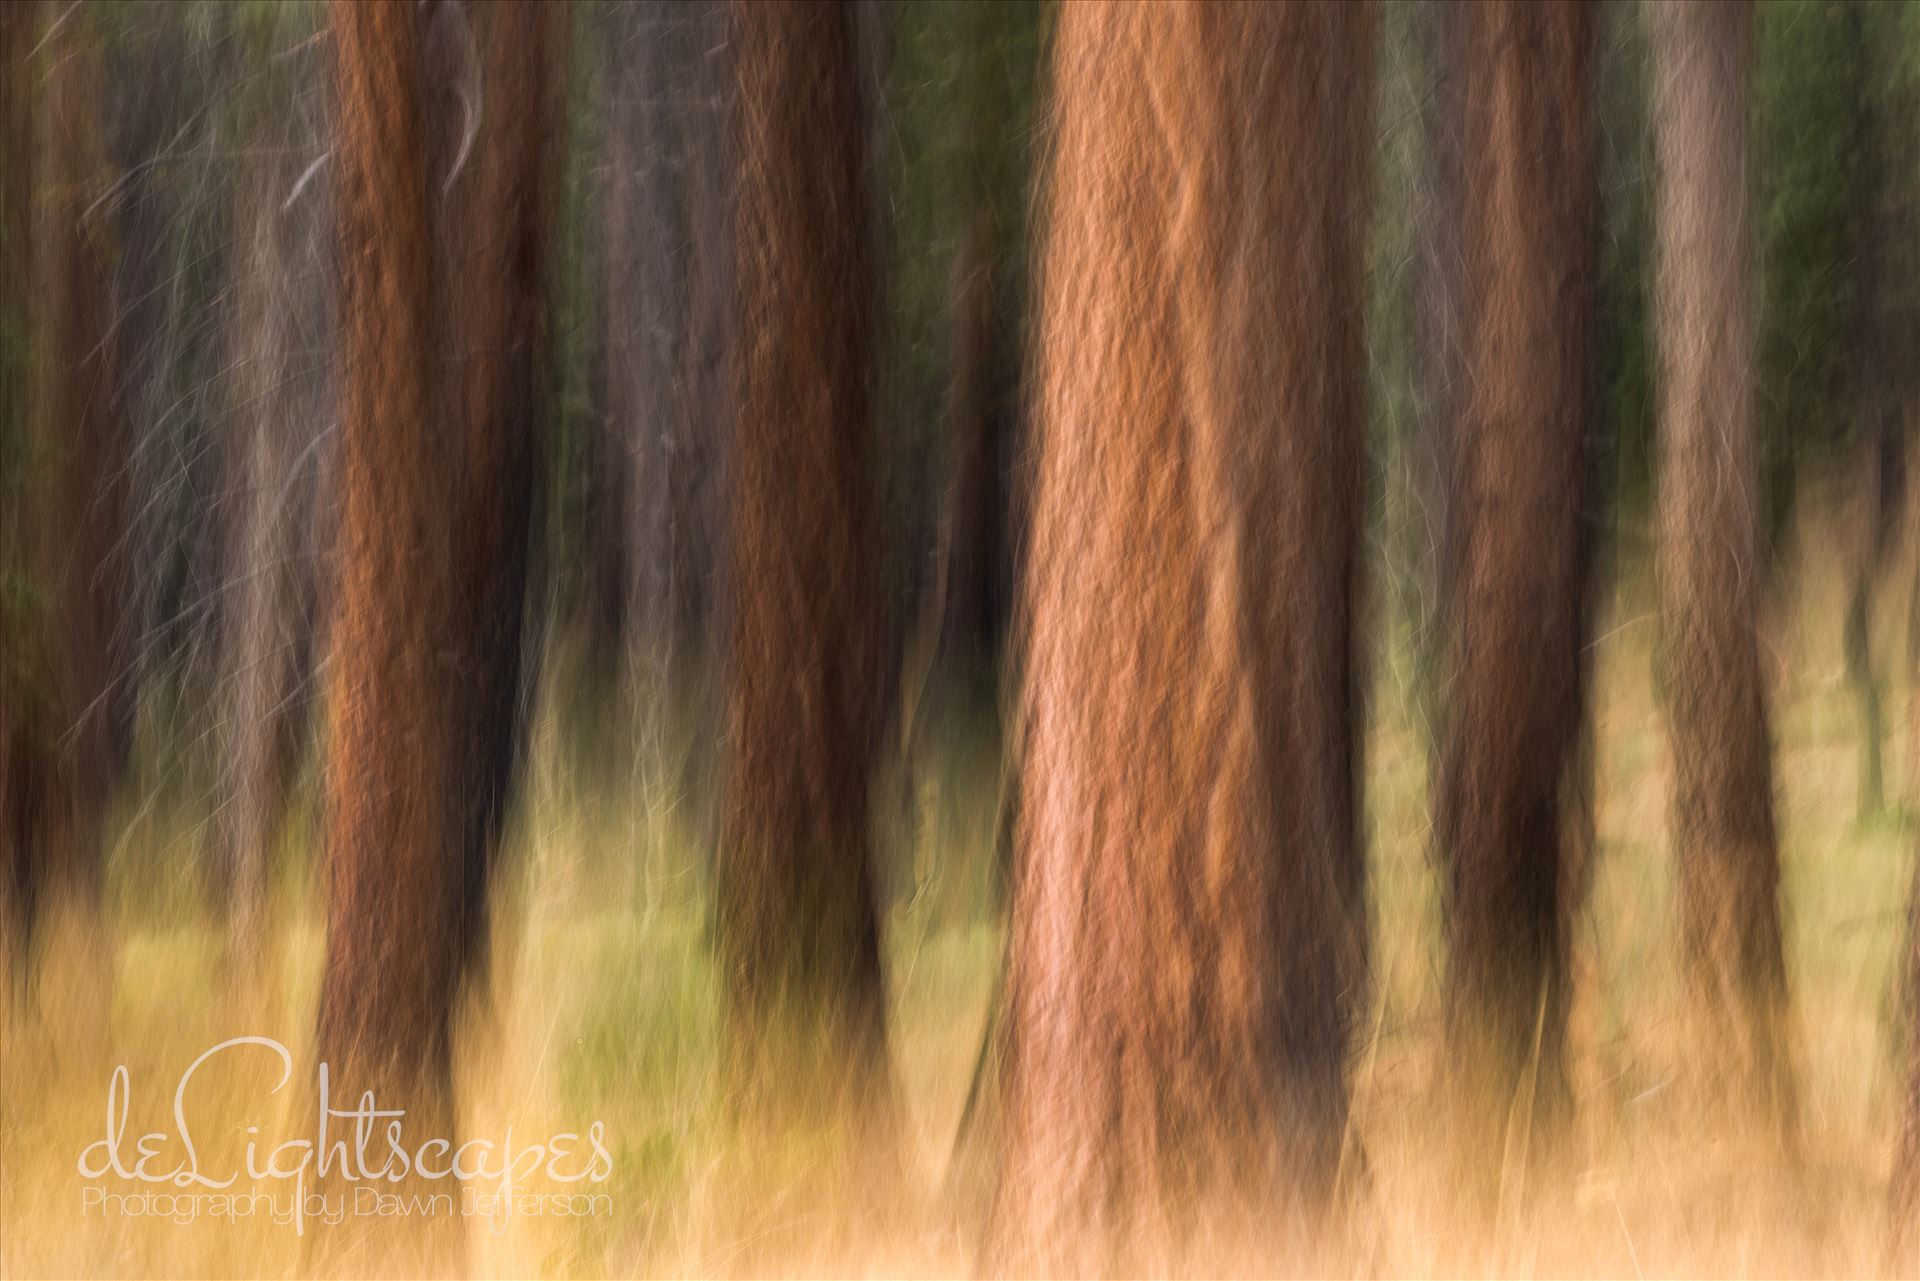 Pining Pine trees in Tahoe using Intentional Camera Movement (ICM- purposeful movement of the camera while the shutter is open causing intentional blurring of your subject.) This is one of my favorite techniques for making dreamy abstracts. by Dawn Jefferson